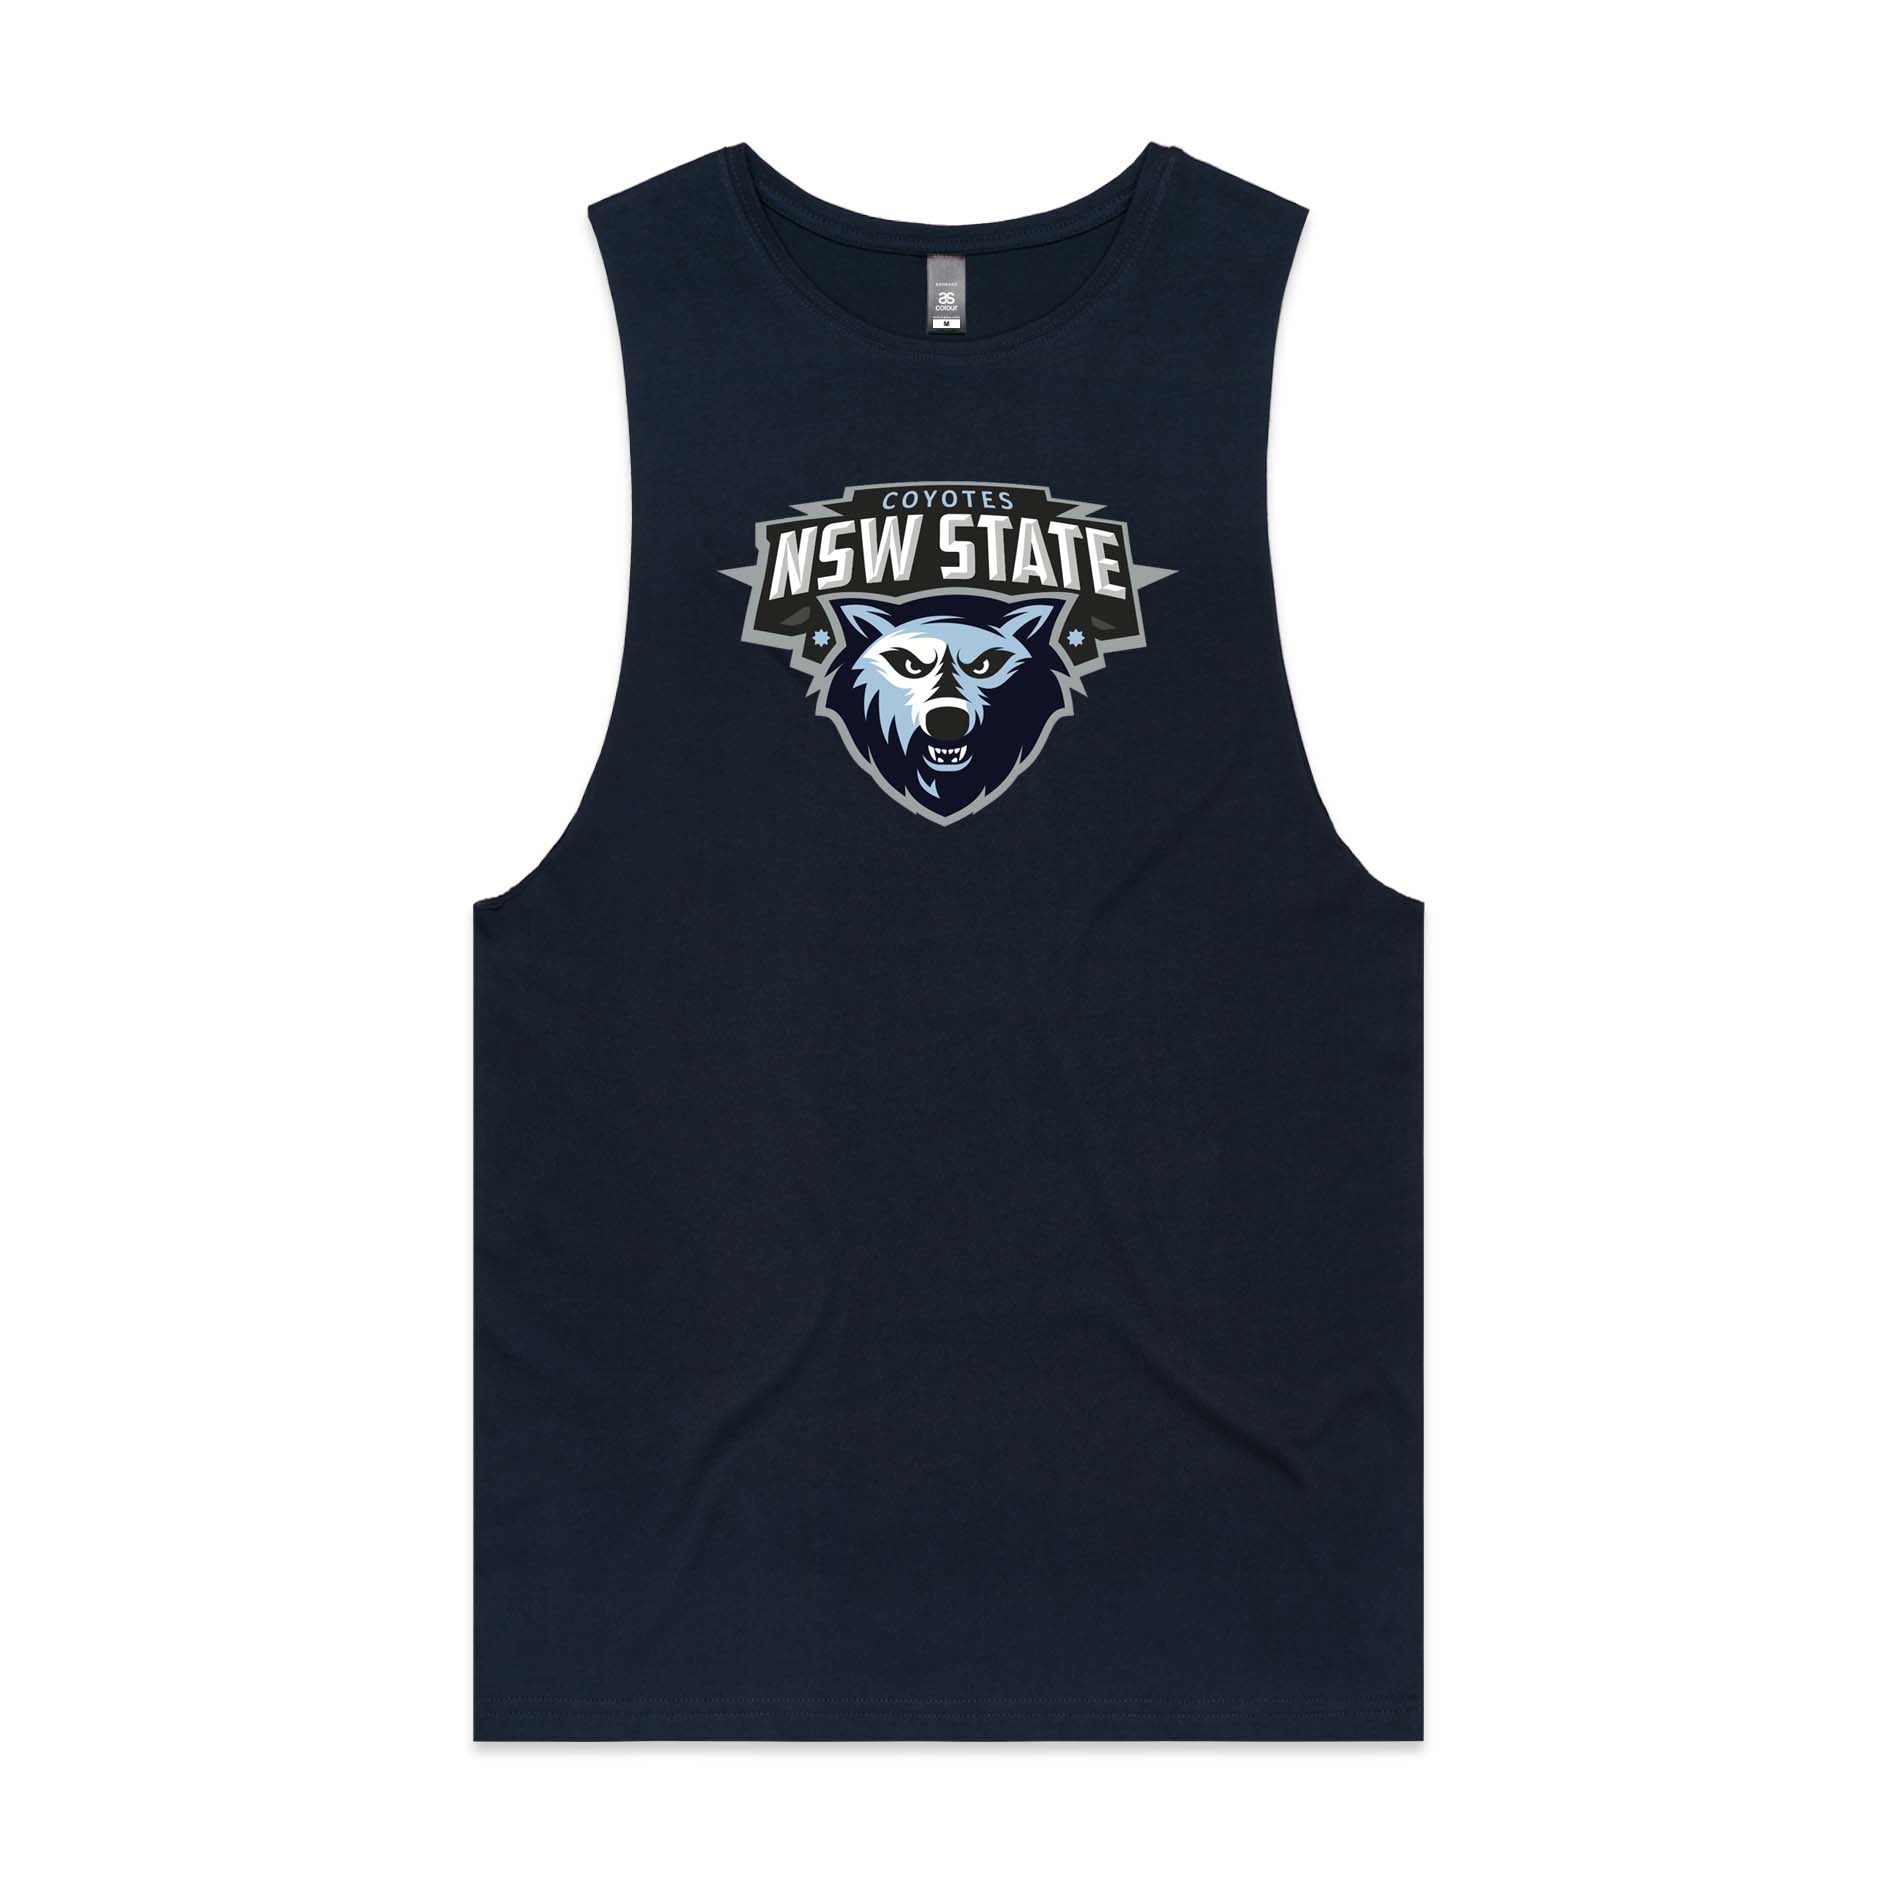 Coyotes Muscle tee